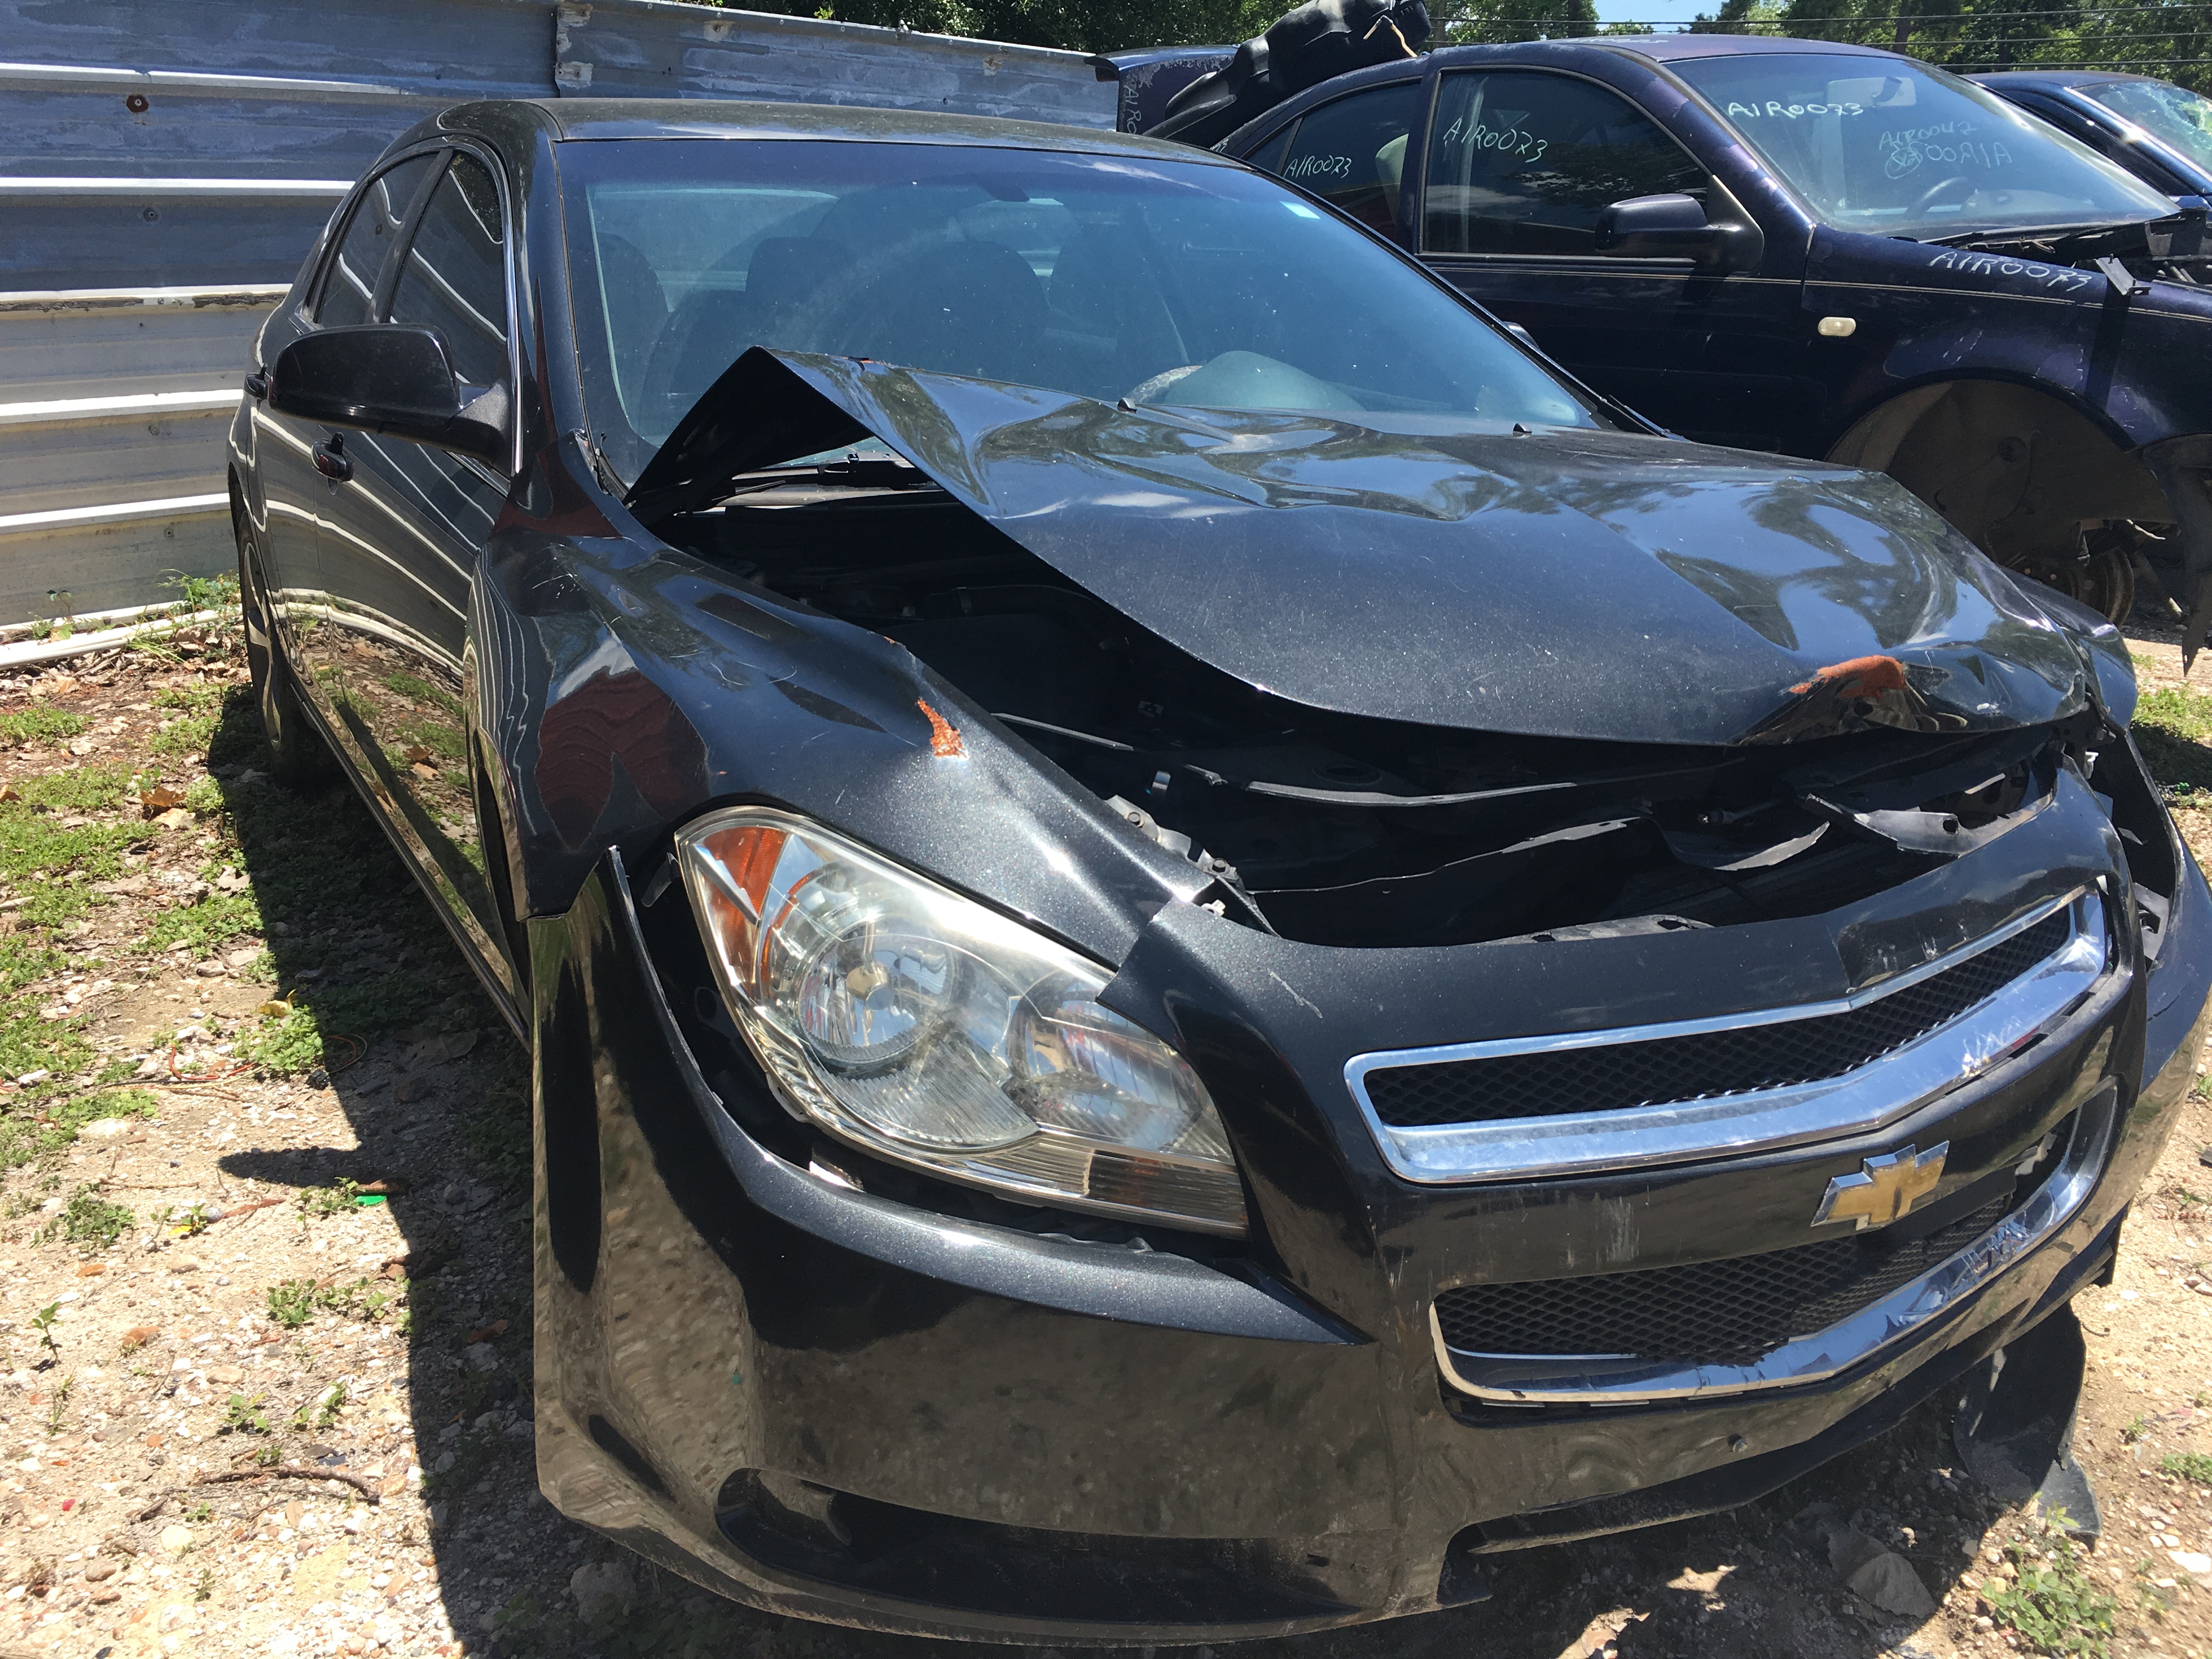 Do You Have a Wrecked Vehicle & You Want To Get Rid Of It?  No Problem. Call Us at 713-454-2715.